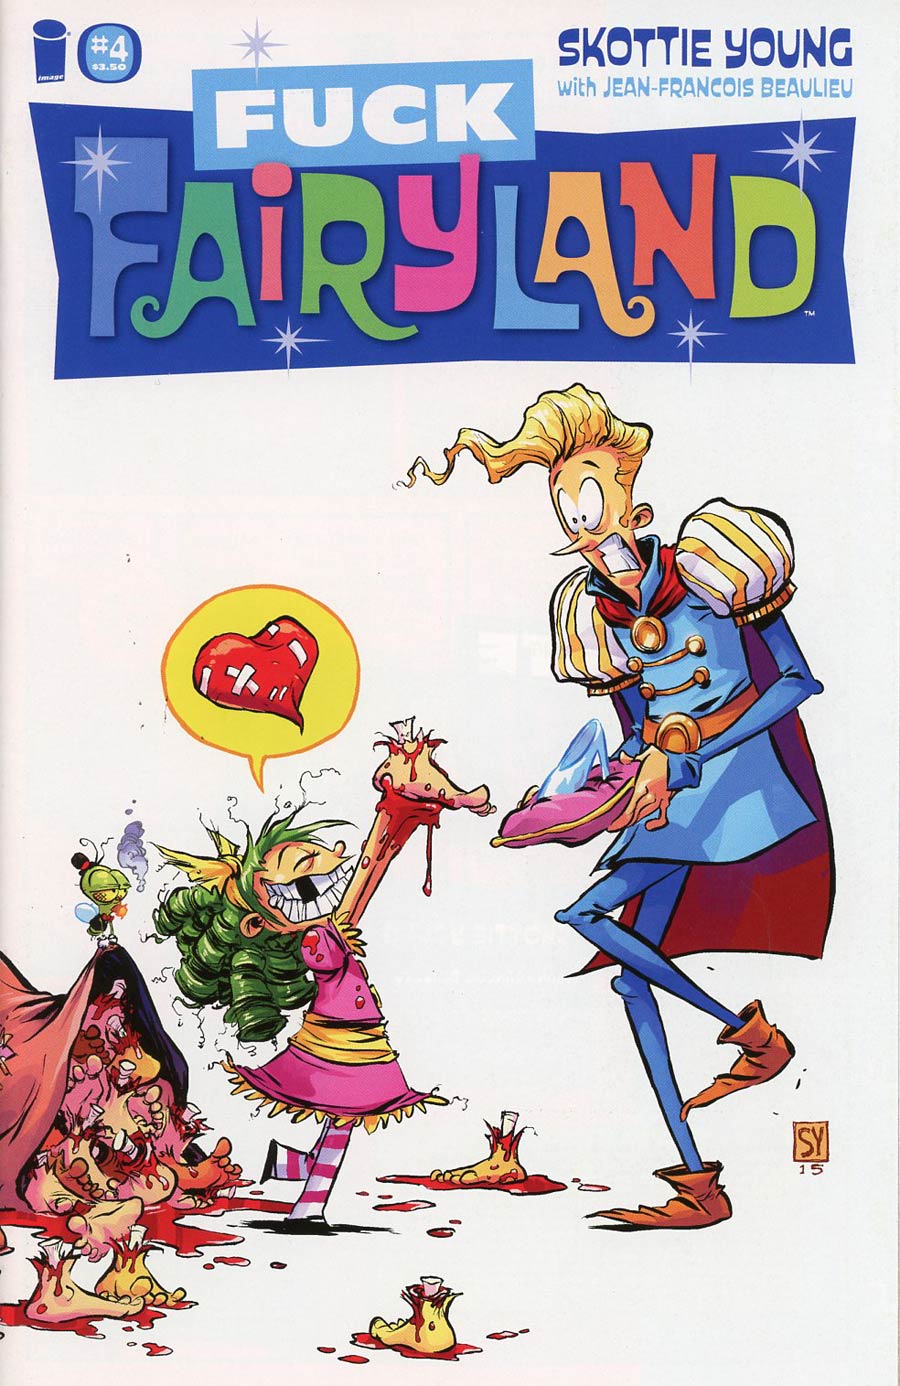 I Hate Fairyland #4 Cover B Variant Skottie Young F*ck Fairyland Cover